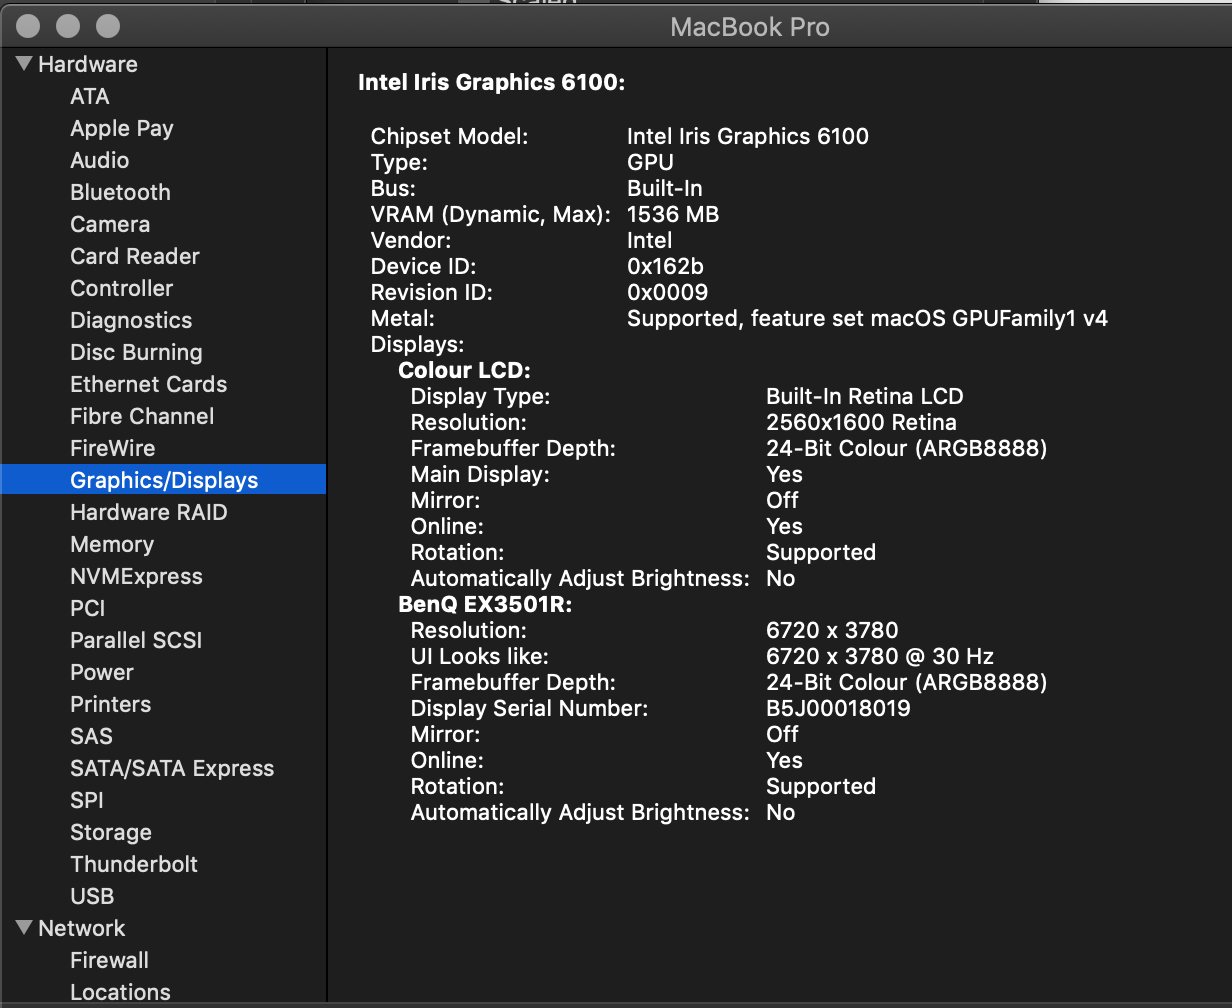 3840 x 1080 resolution driver for mac